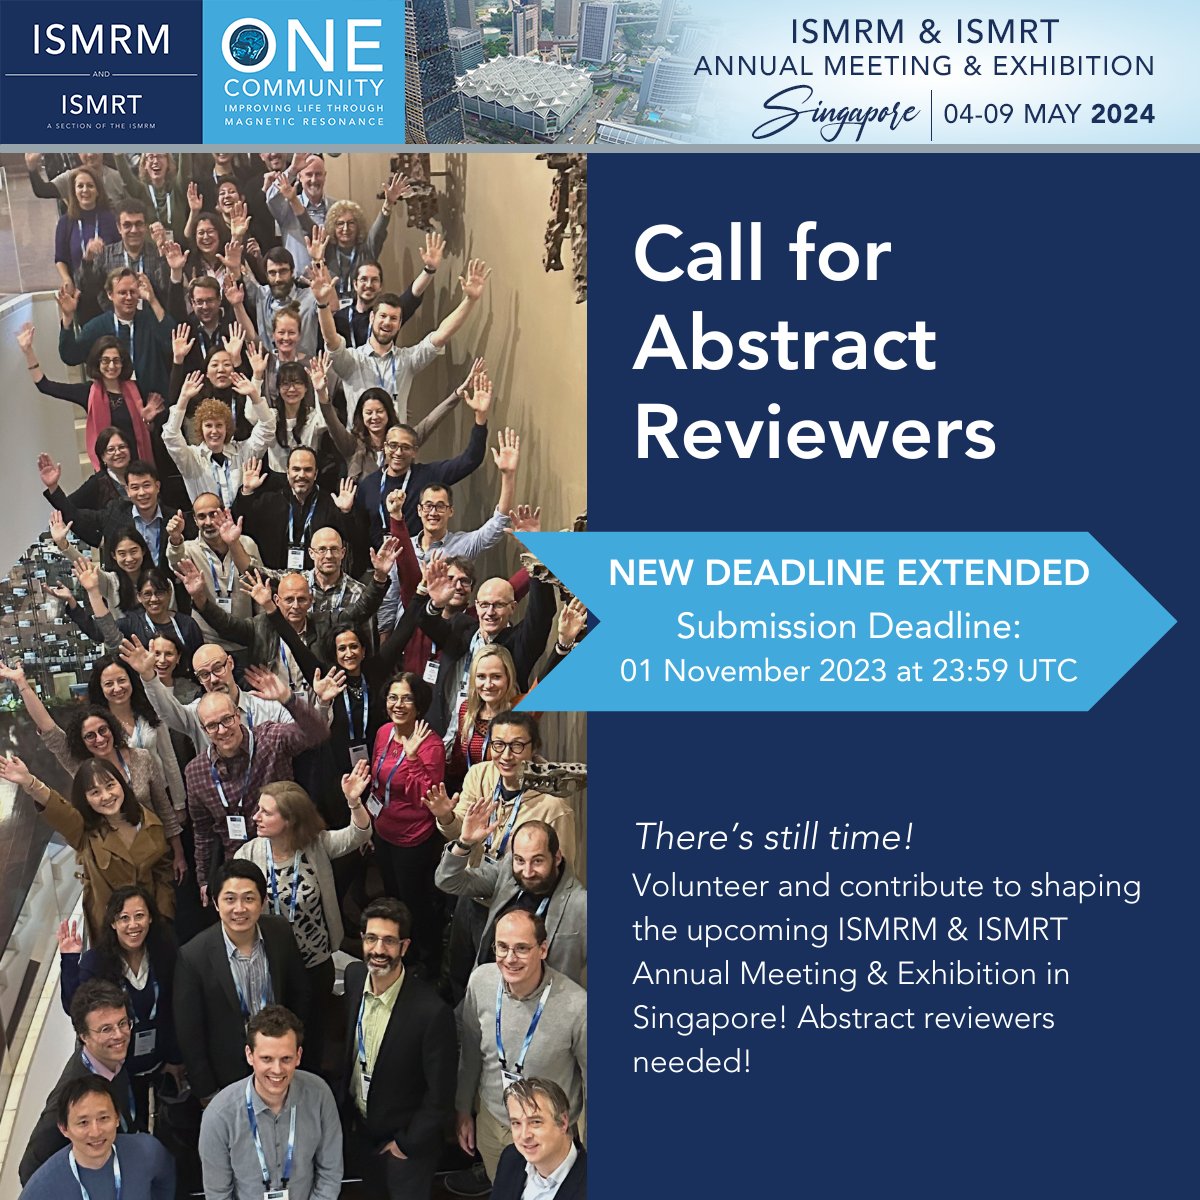 Deadline in 6 days: Now 01 November 2023 at 23:59 UTC We love the abstracts being submitted, keep them coming! It's a great challenge to have, but that means we NEED MORE reviewers! We want both experienced and new reviewers. Get started: bit.ly/3gXpH1z #ISMRM #ISMRT